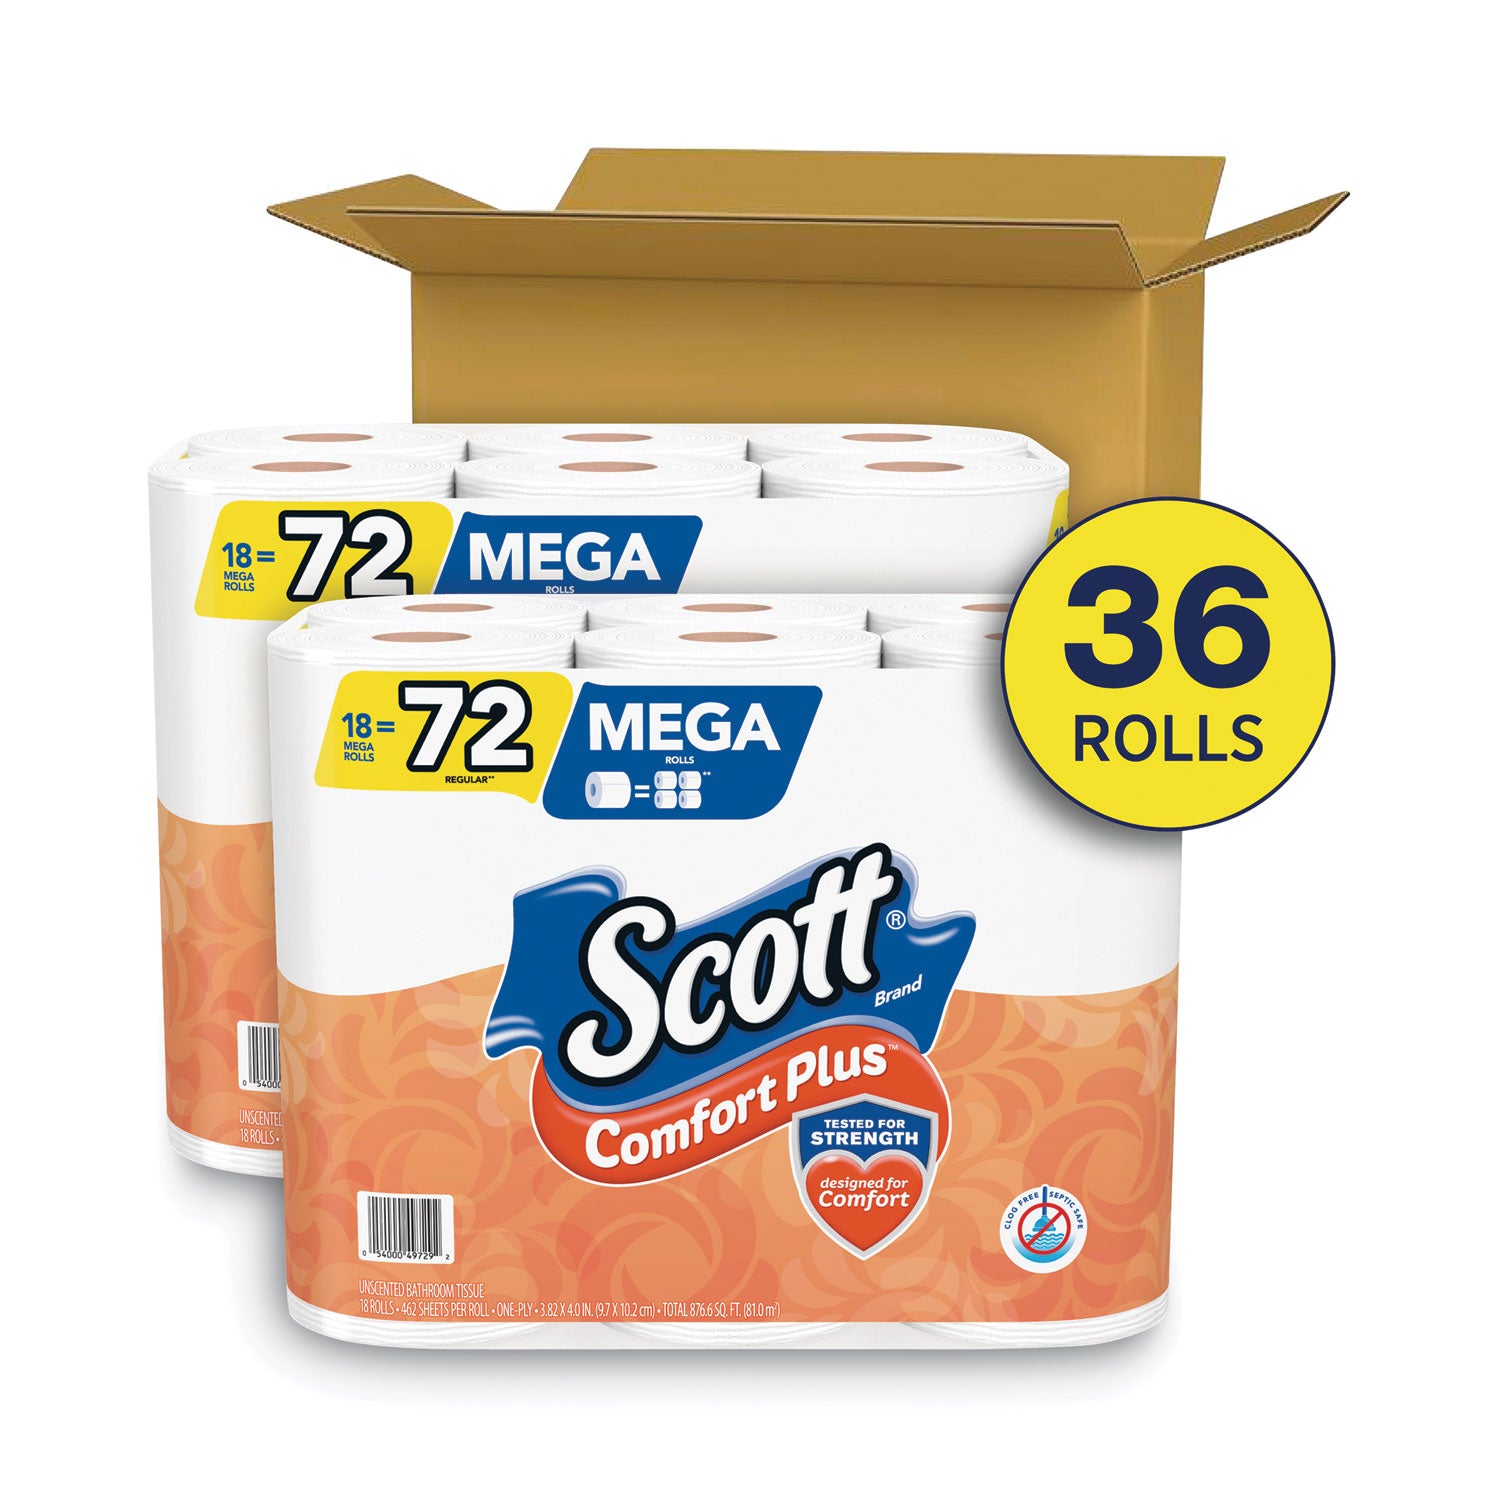 comfortplus-toilet-paper-mega-roll-septic-safe-1-ply-white-462-sheets-roll-36-rolls-pack_kcc53329 - 2